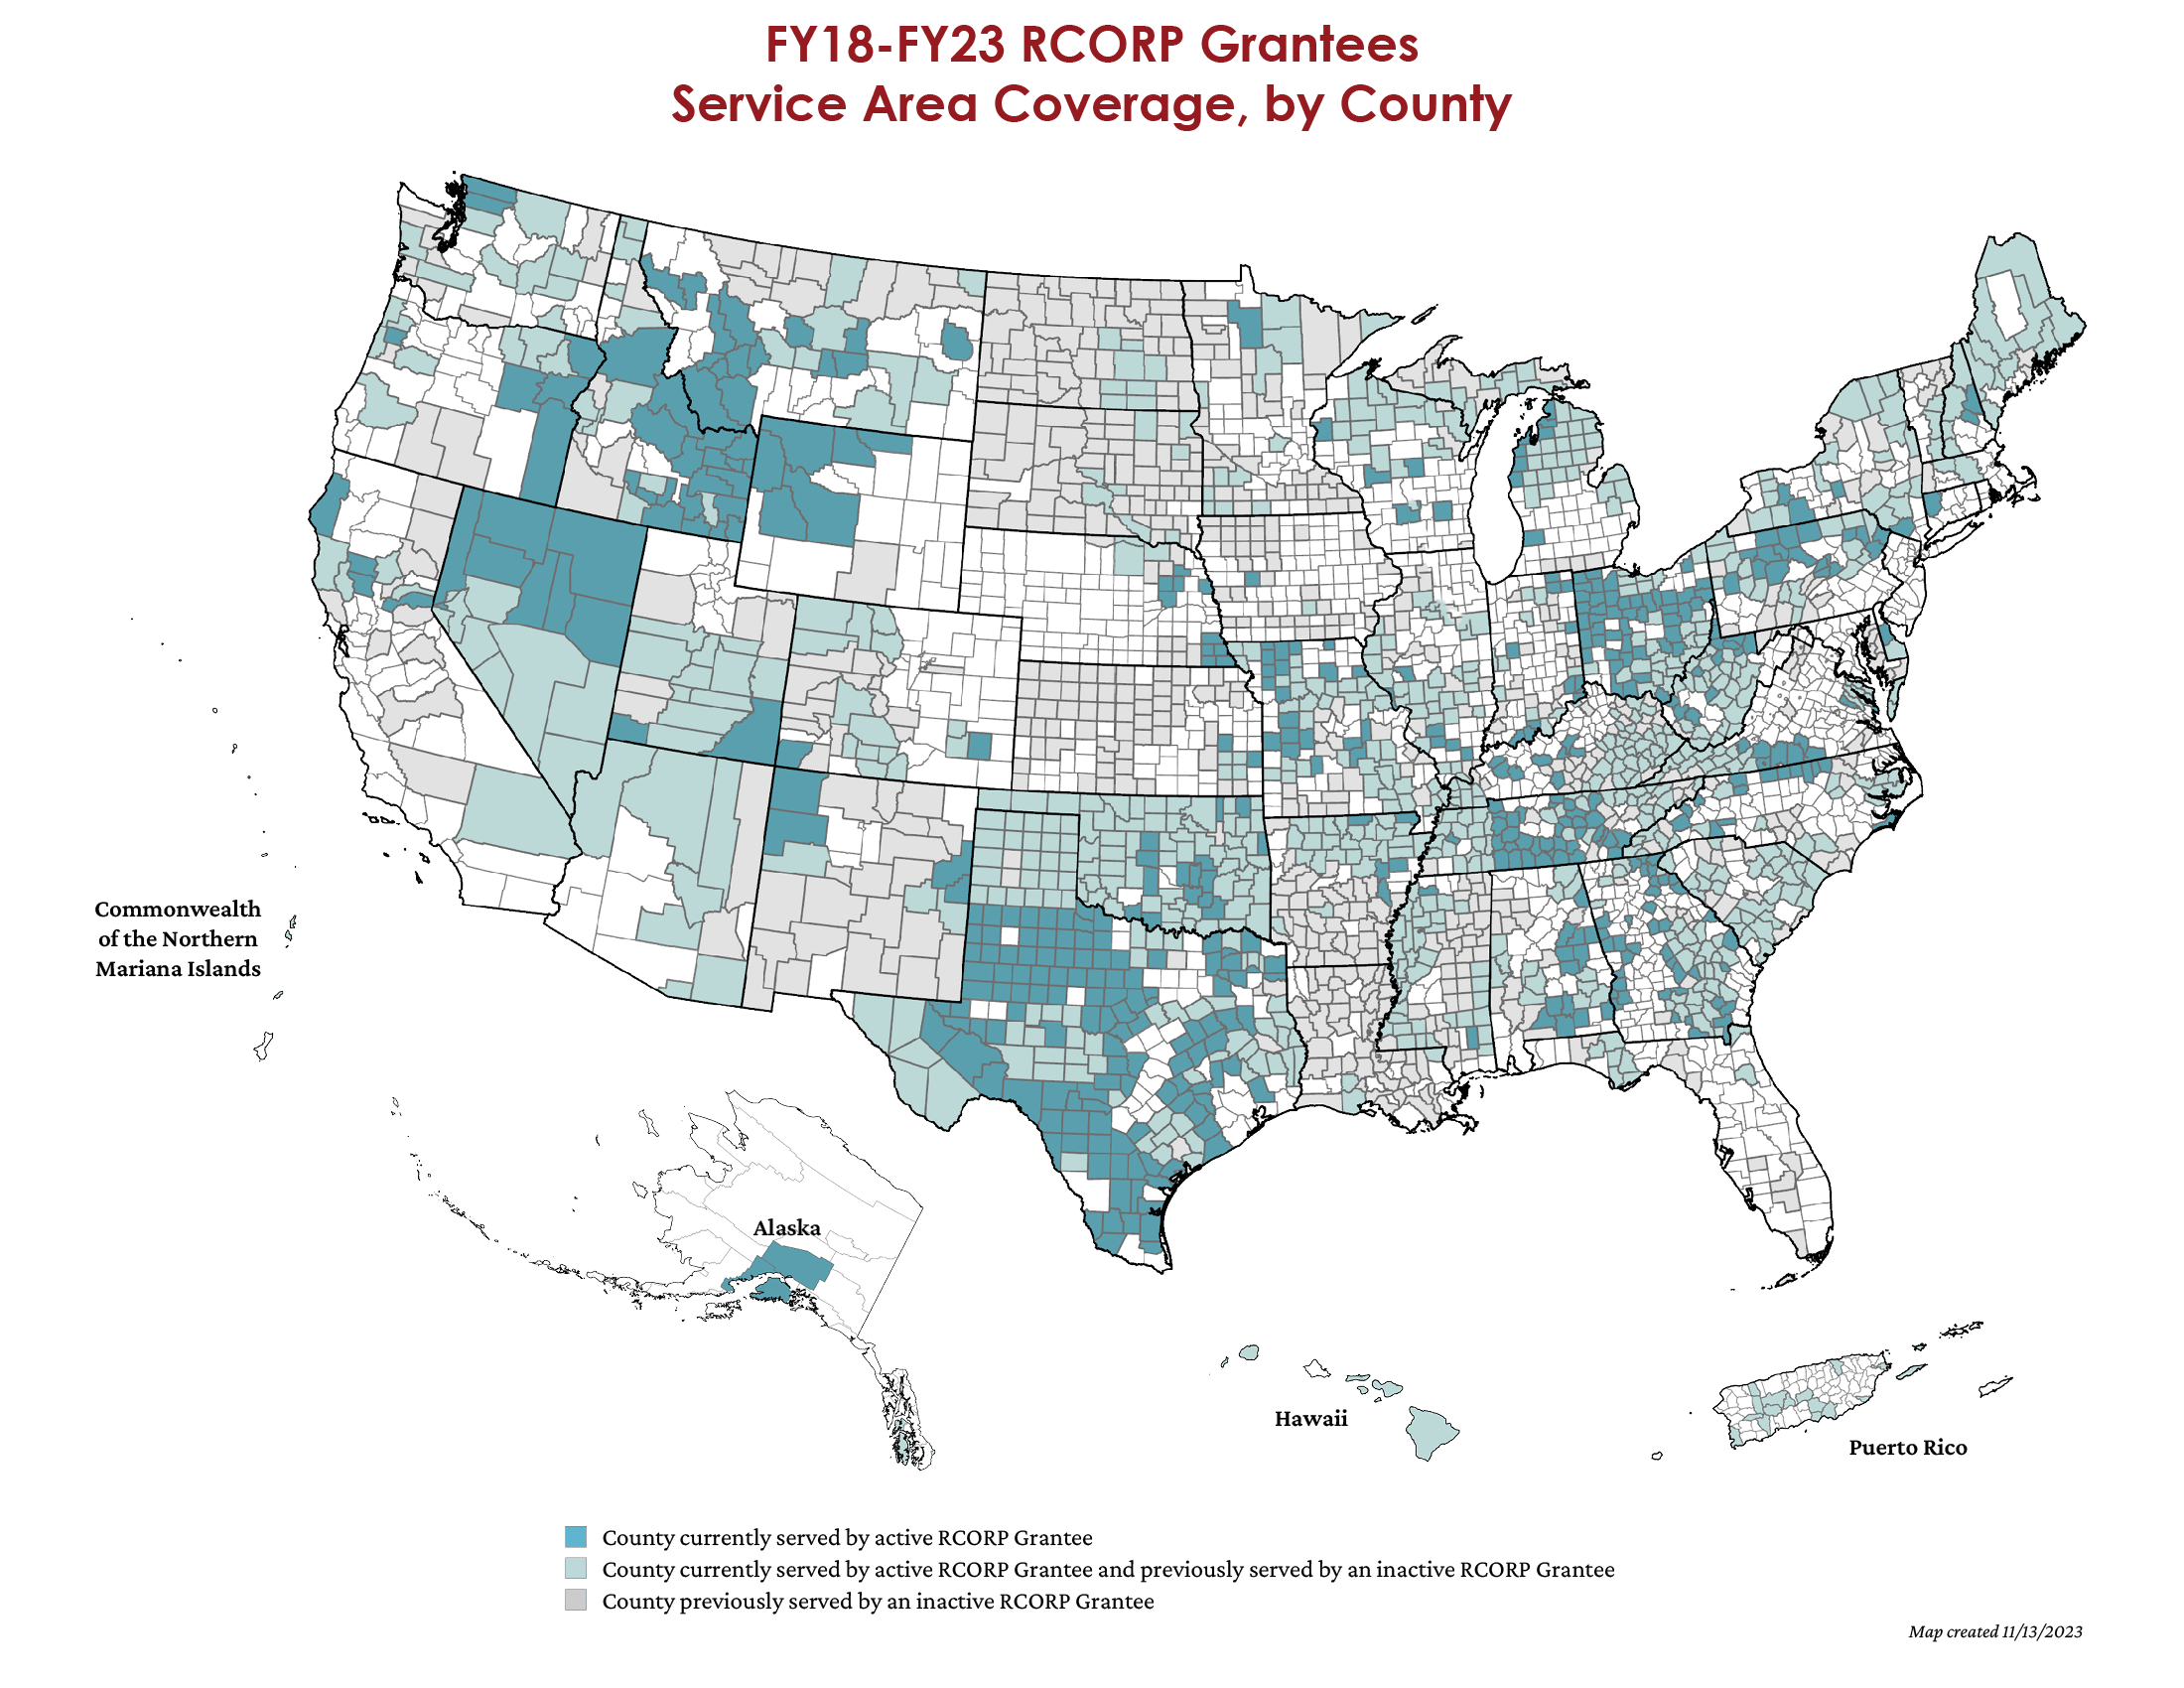 USA map showing location of grantees for fiscal years 18 through 2023